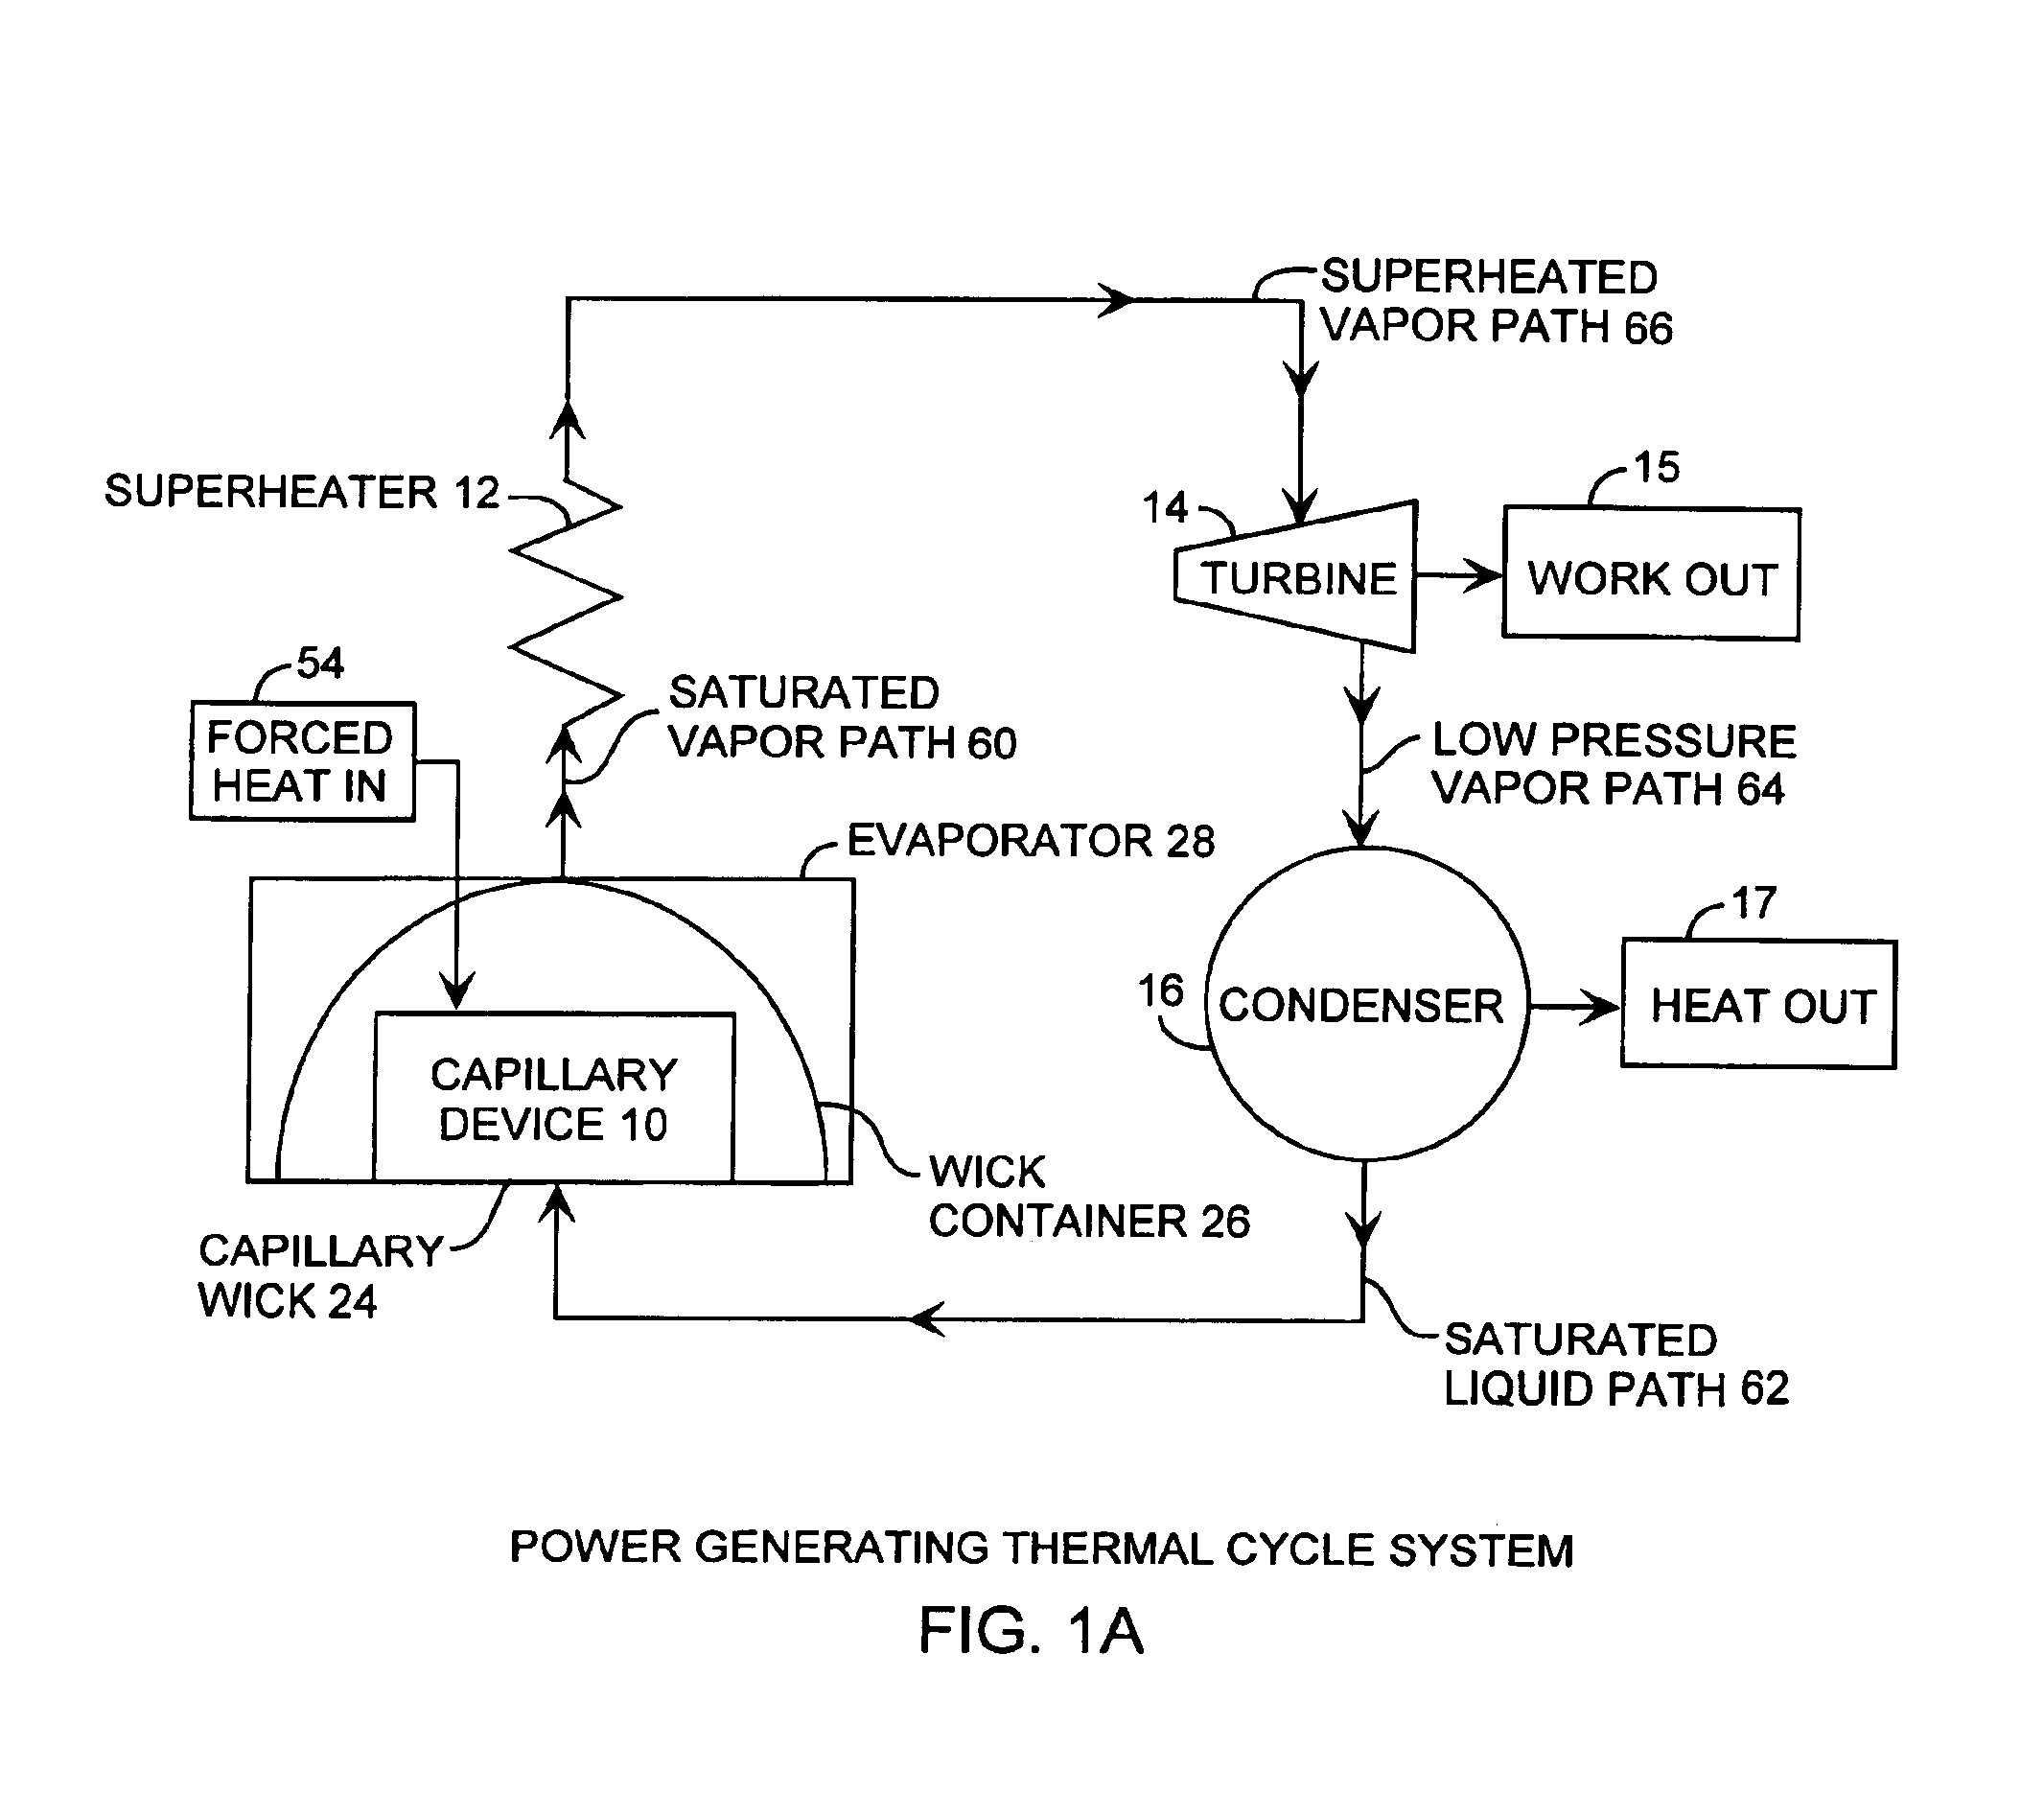 Capillary two-phase thermodynamic power conversion cycle system